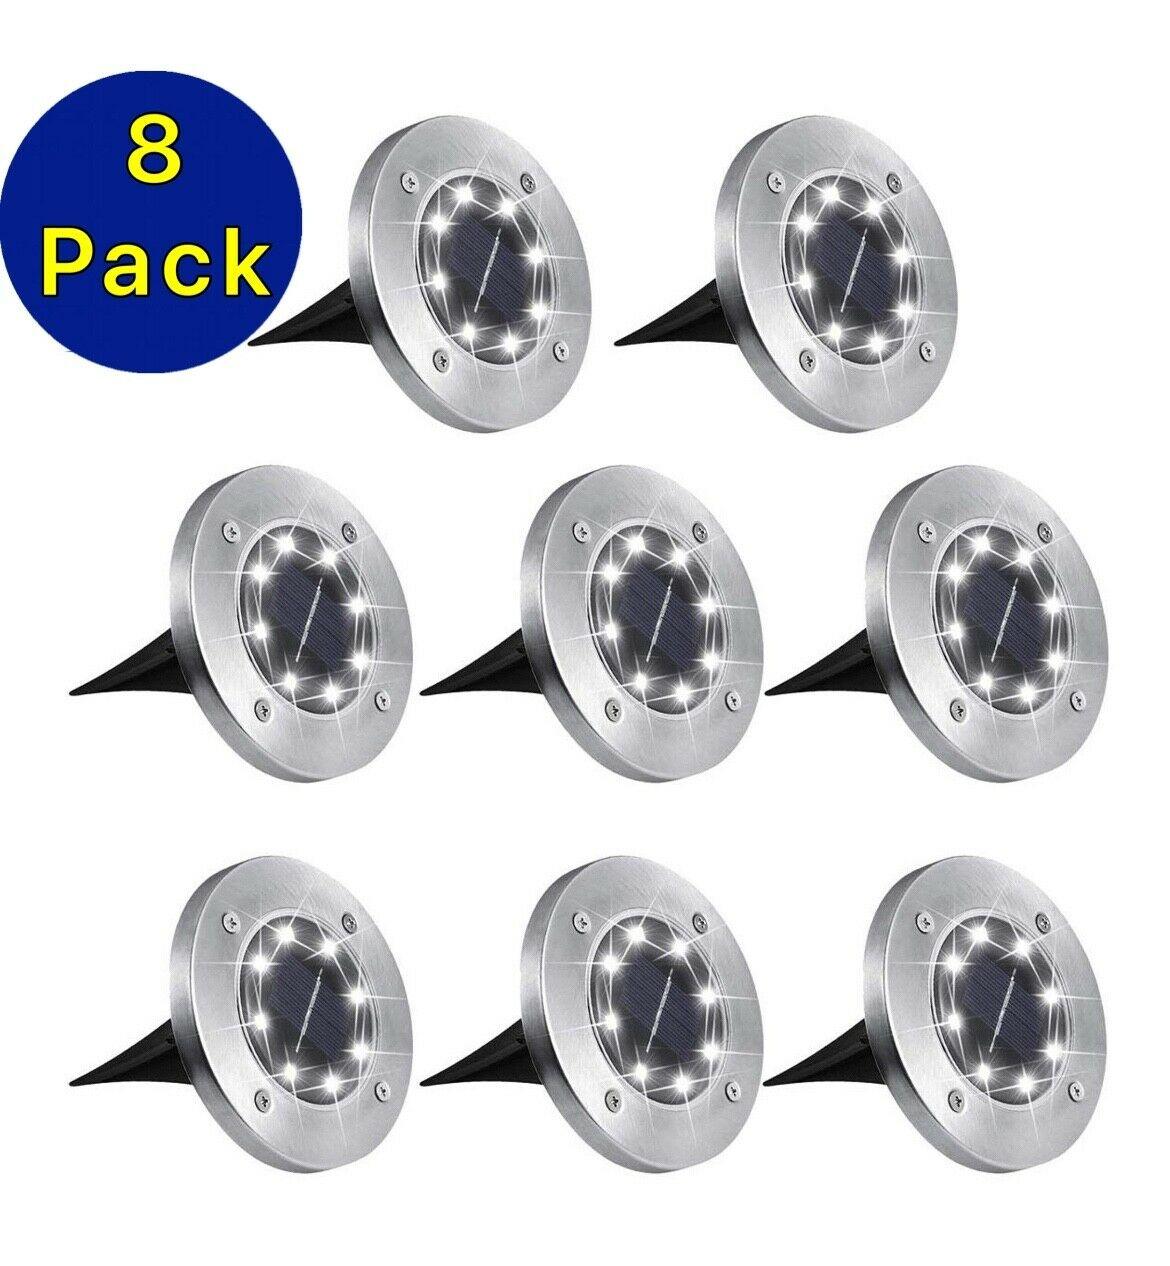 8-PACK Solar In Ground Lights Outdoor Buried Lamp Disk LED Lawn Pathway Garden - Etyn Online {{ product_tag }}